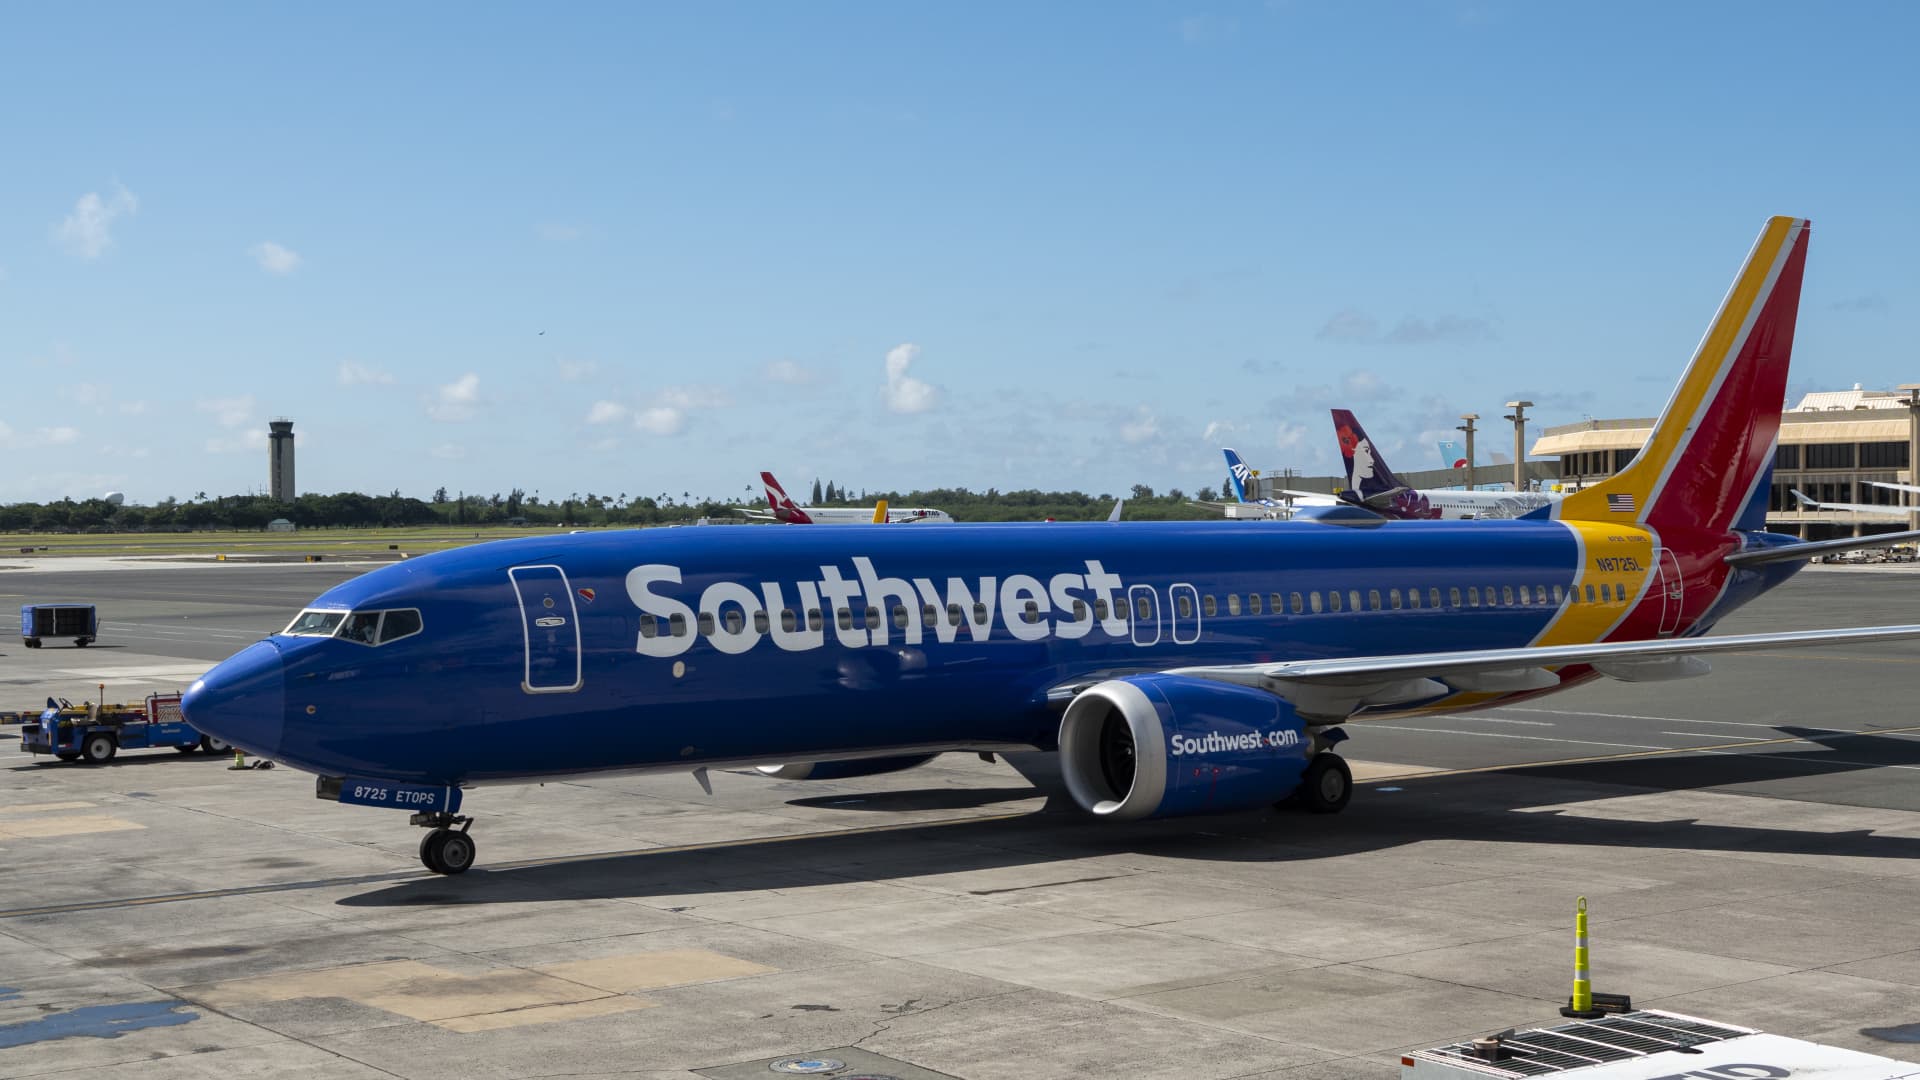 Boeing engine part fell off during Southwest flight takeoff, FAA says